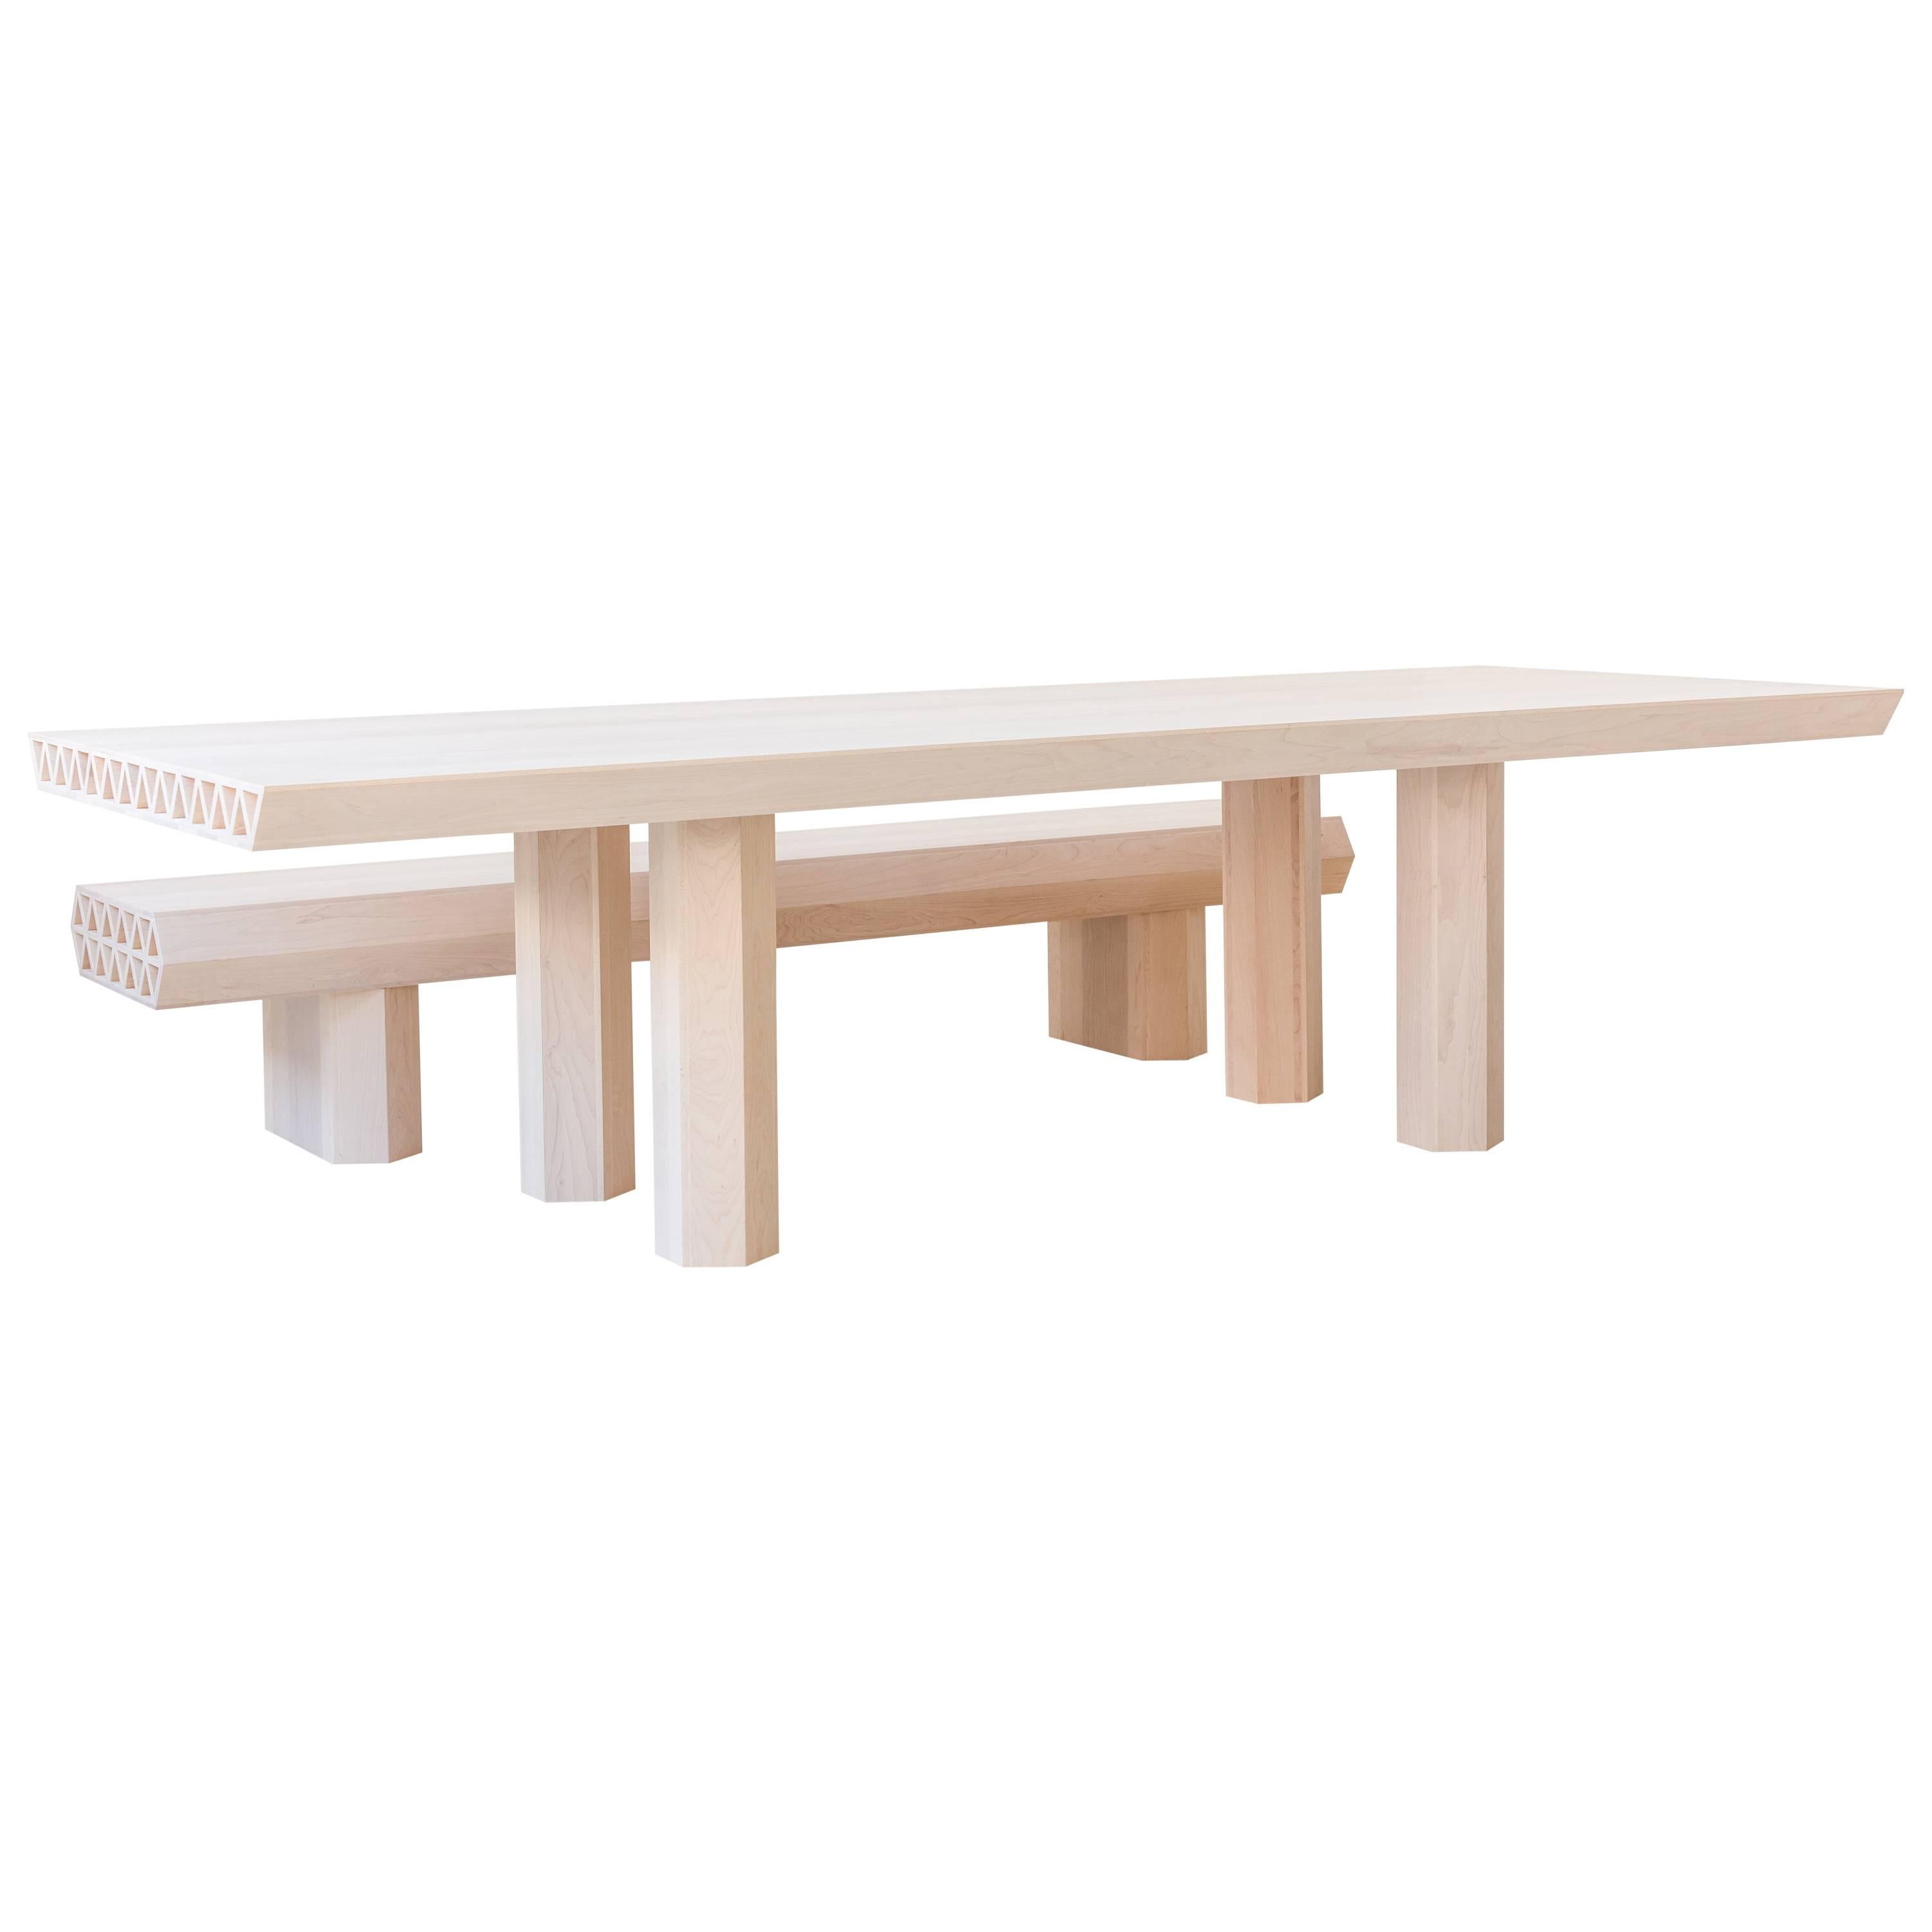 Limited Edition Assemblage Wood Dining Table in Maple by Fort Standard